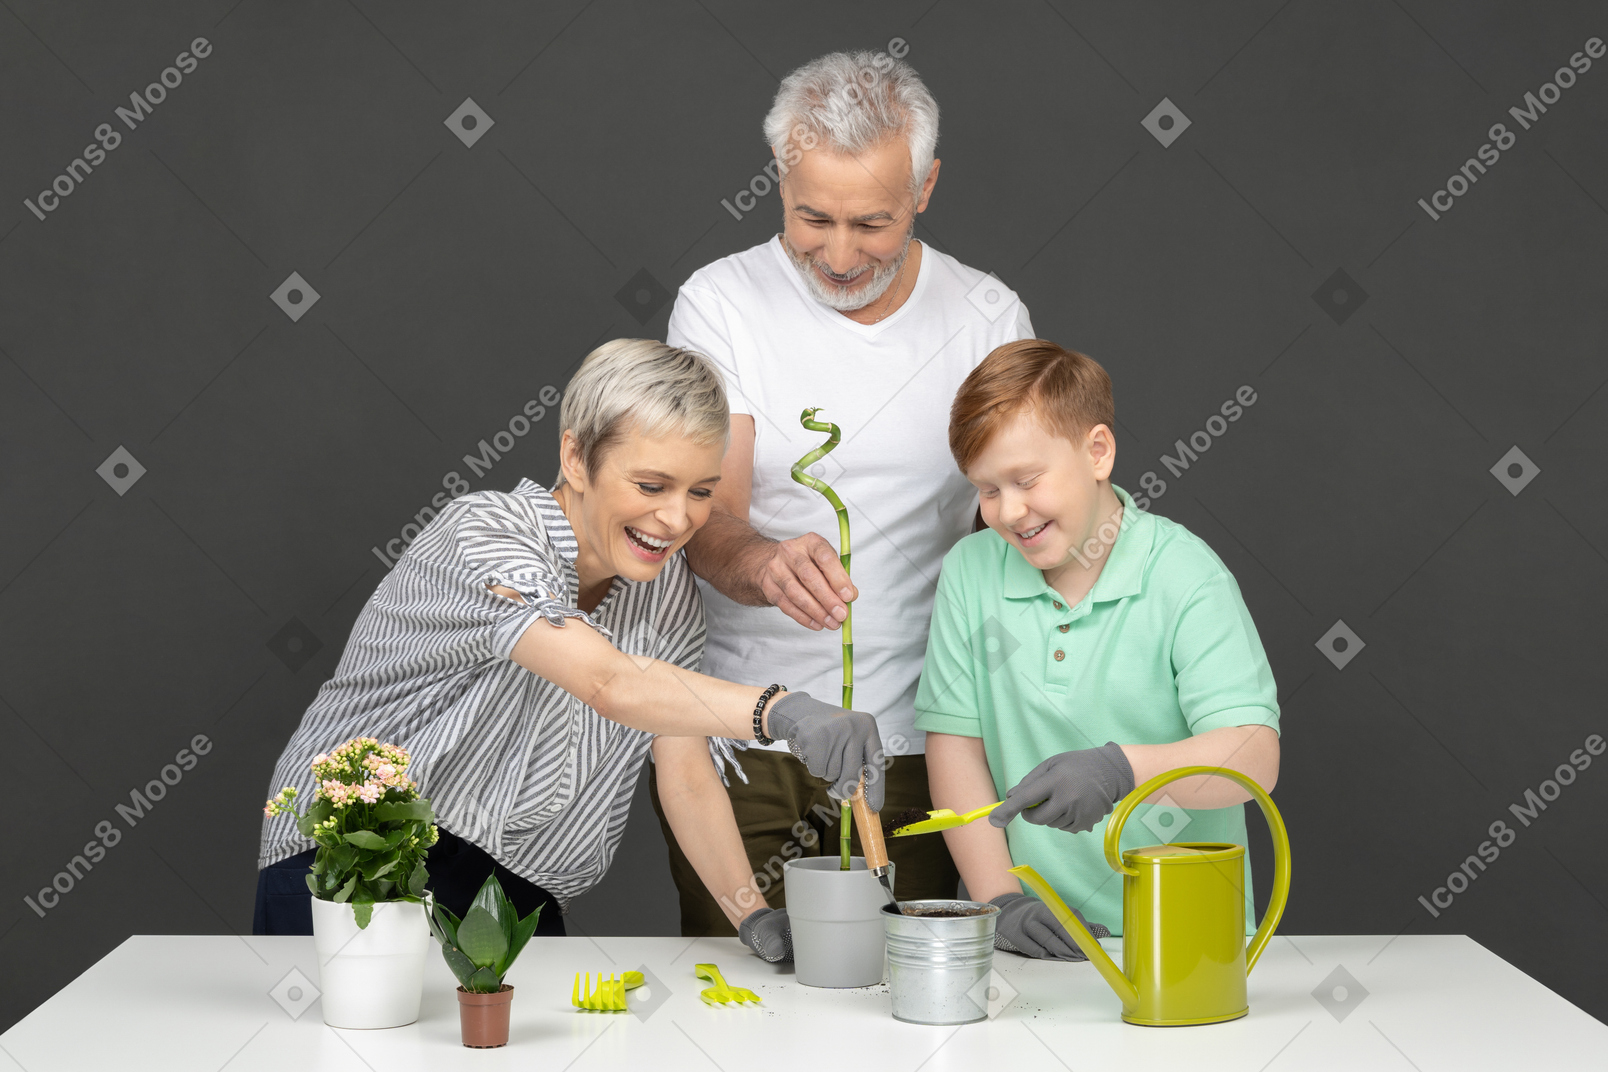 Happy family taking care of home plants